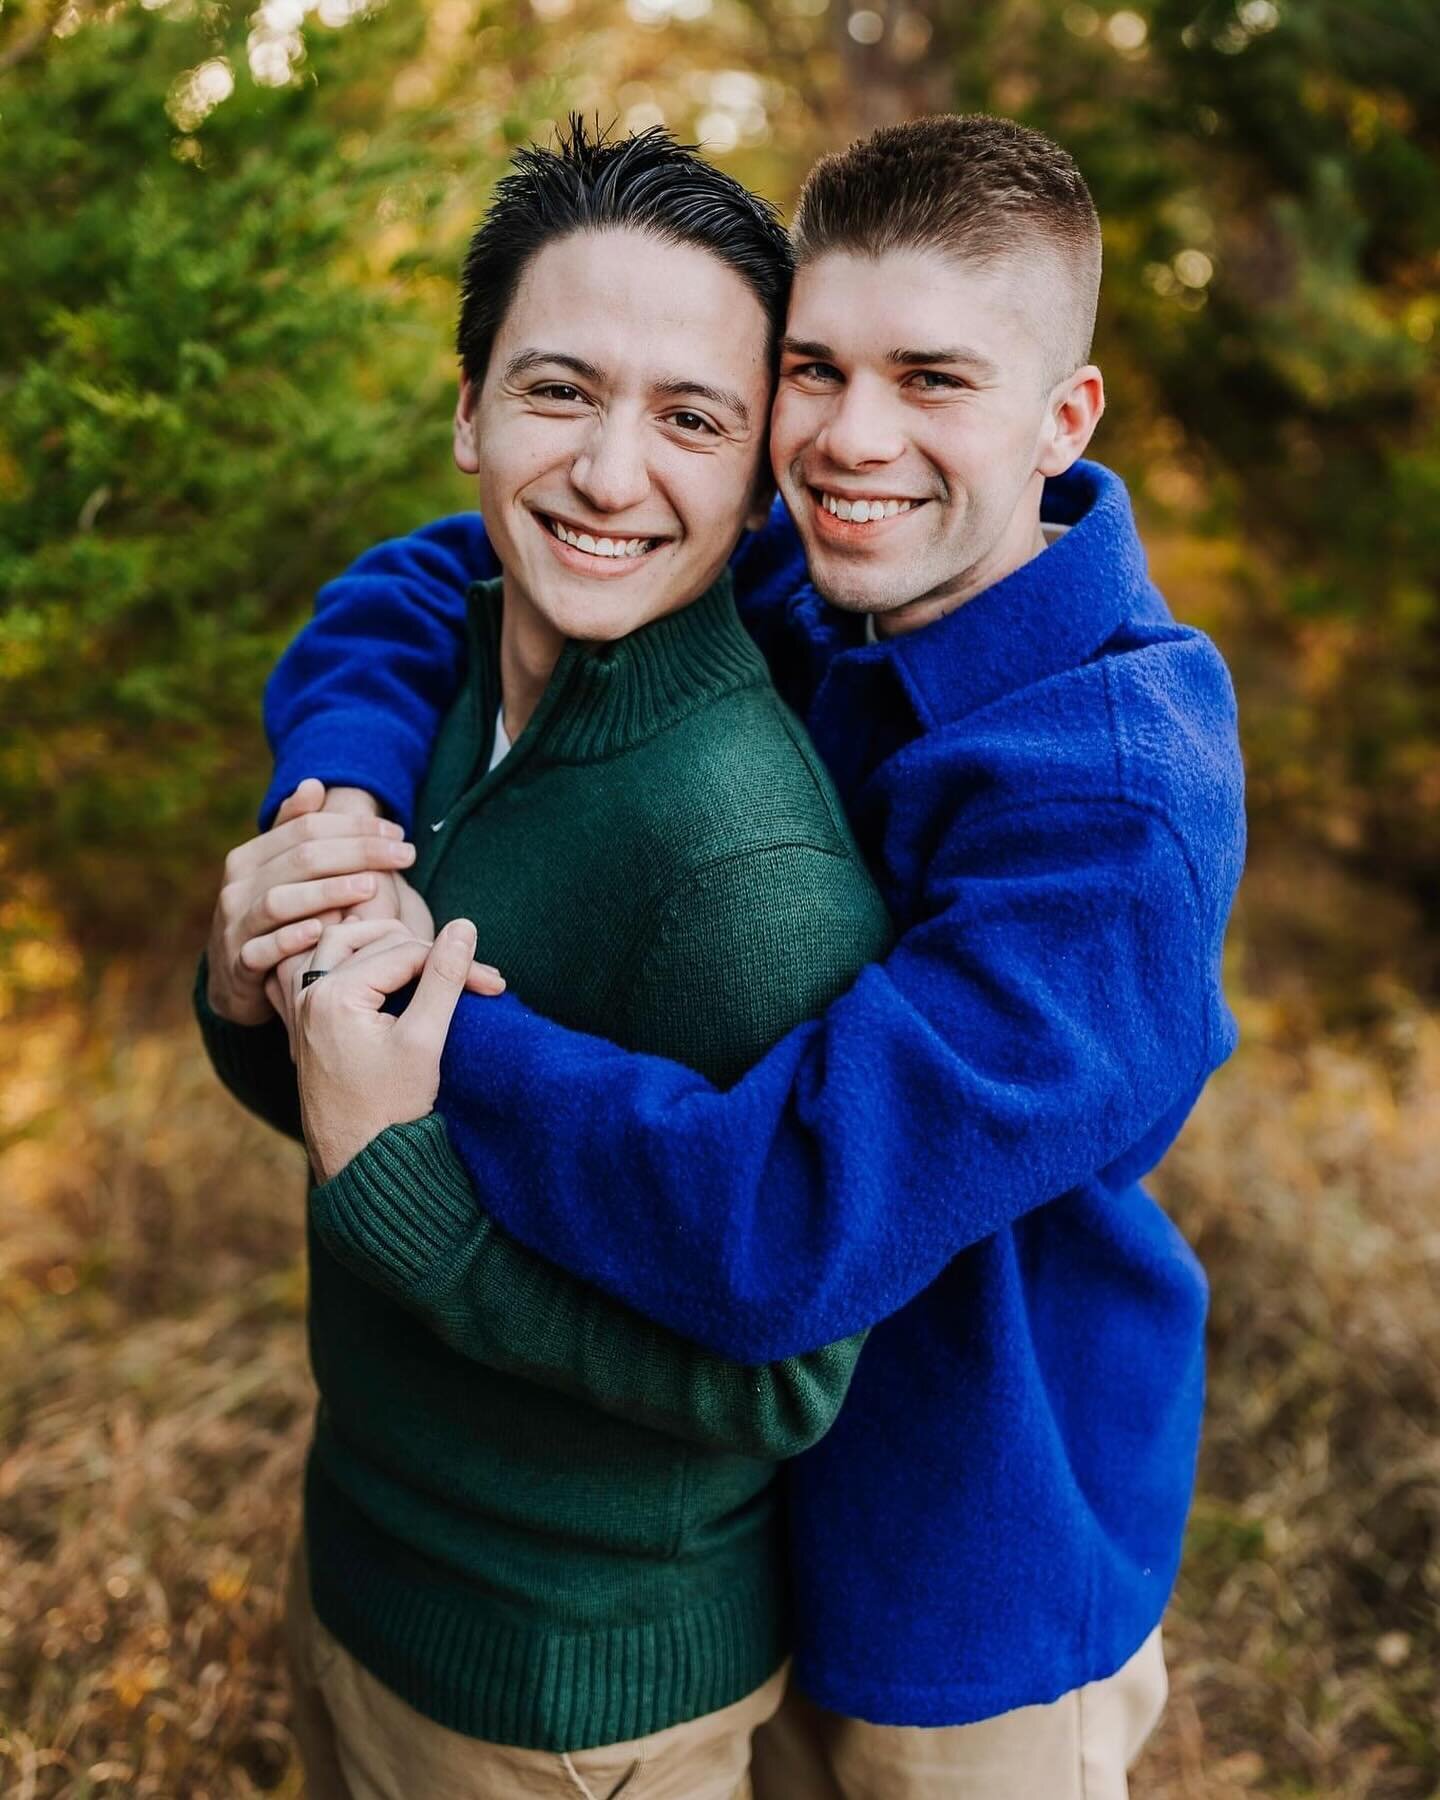 I had such a great time getting to know Nathan and Ethan during their engagement session! It is an honor to work with genuine couples like these two week after week. I can't wait to document their wedding next year. ❤